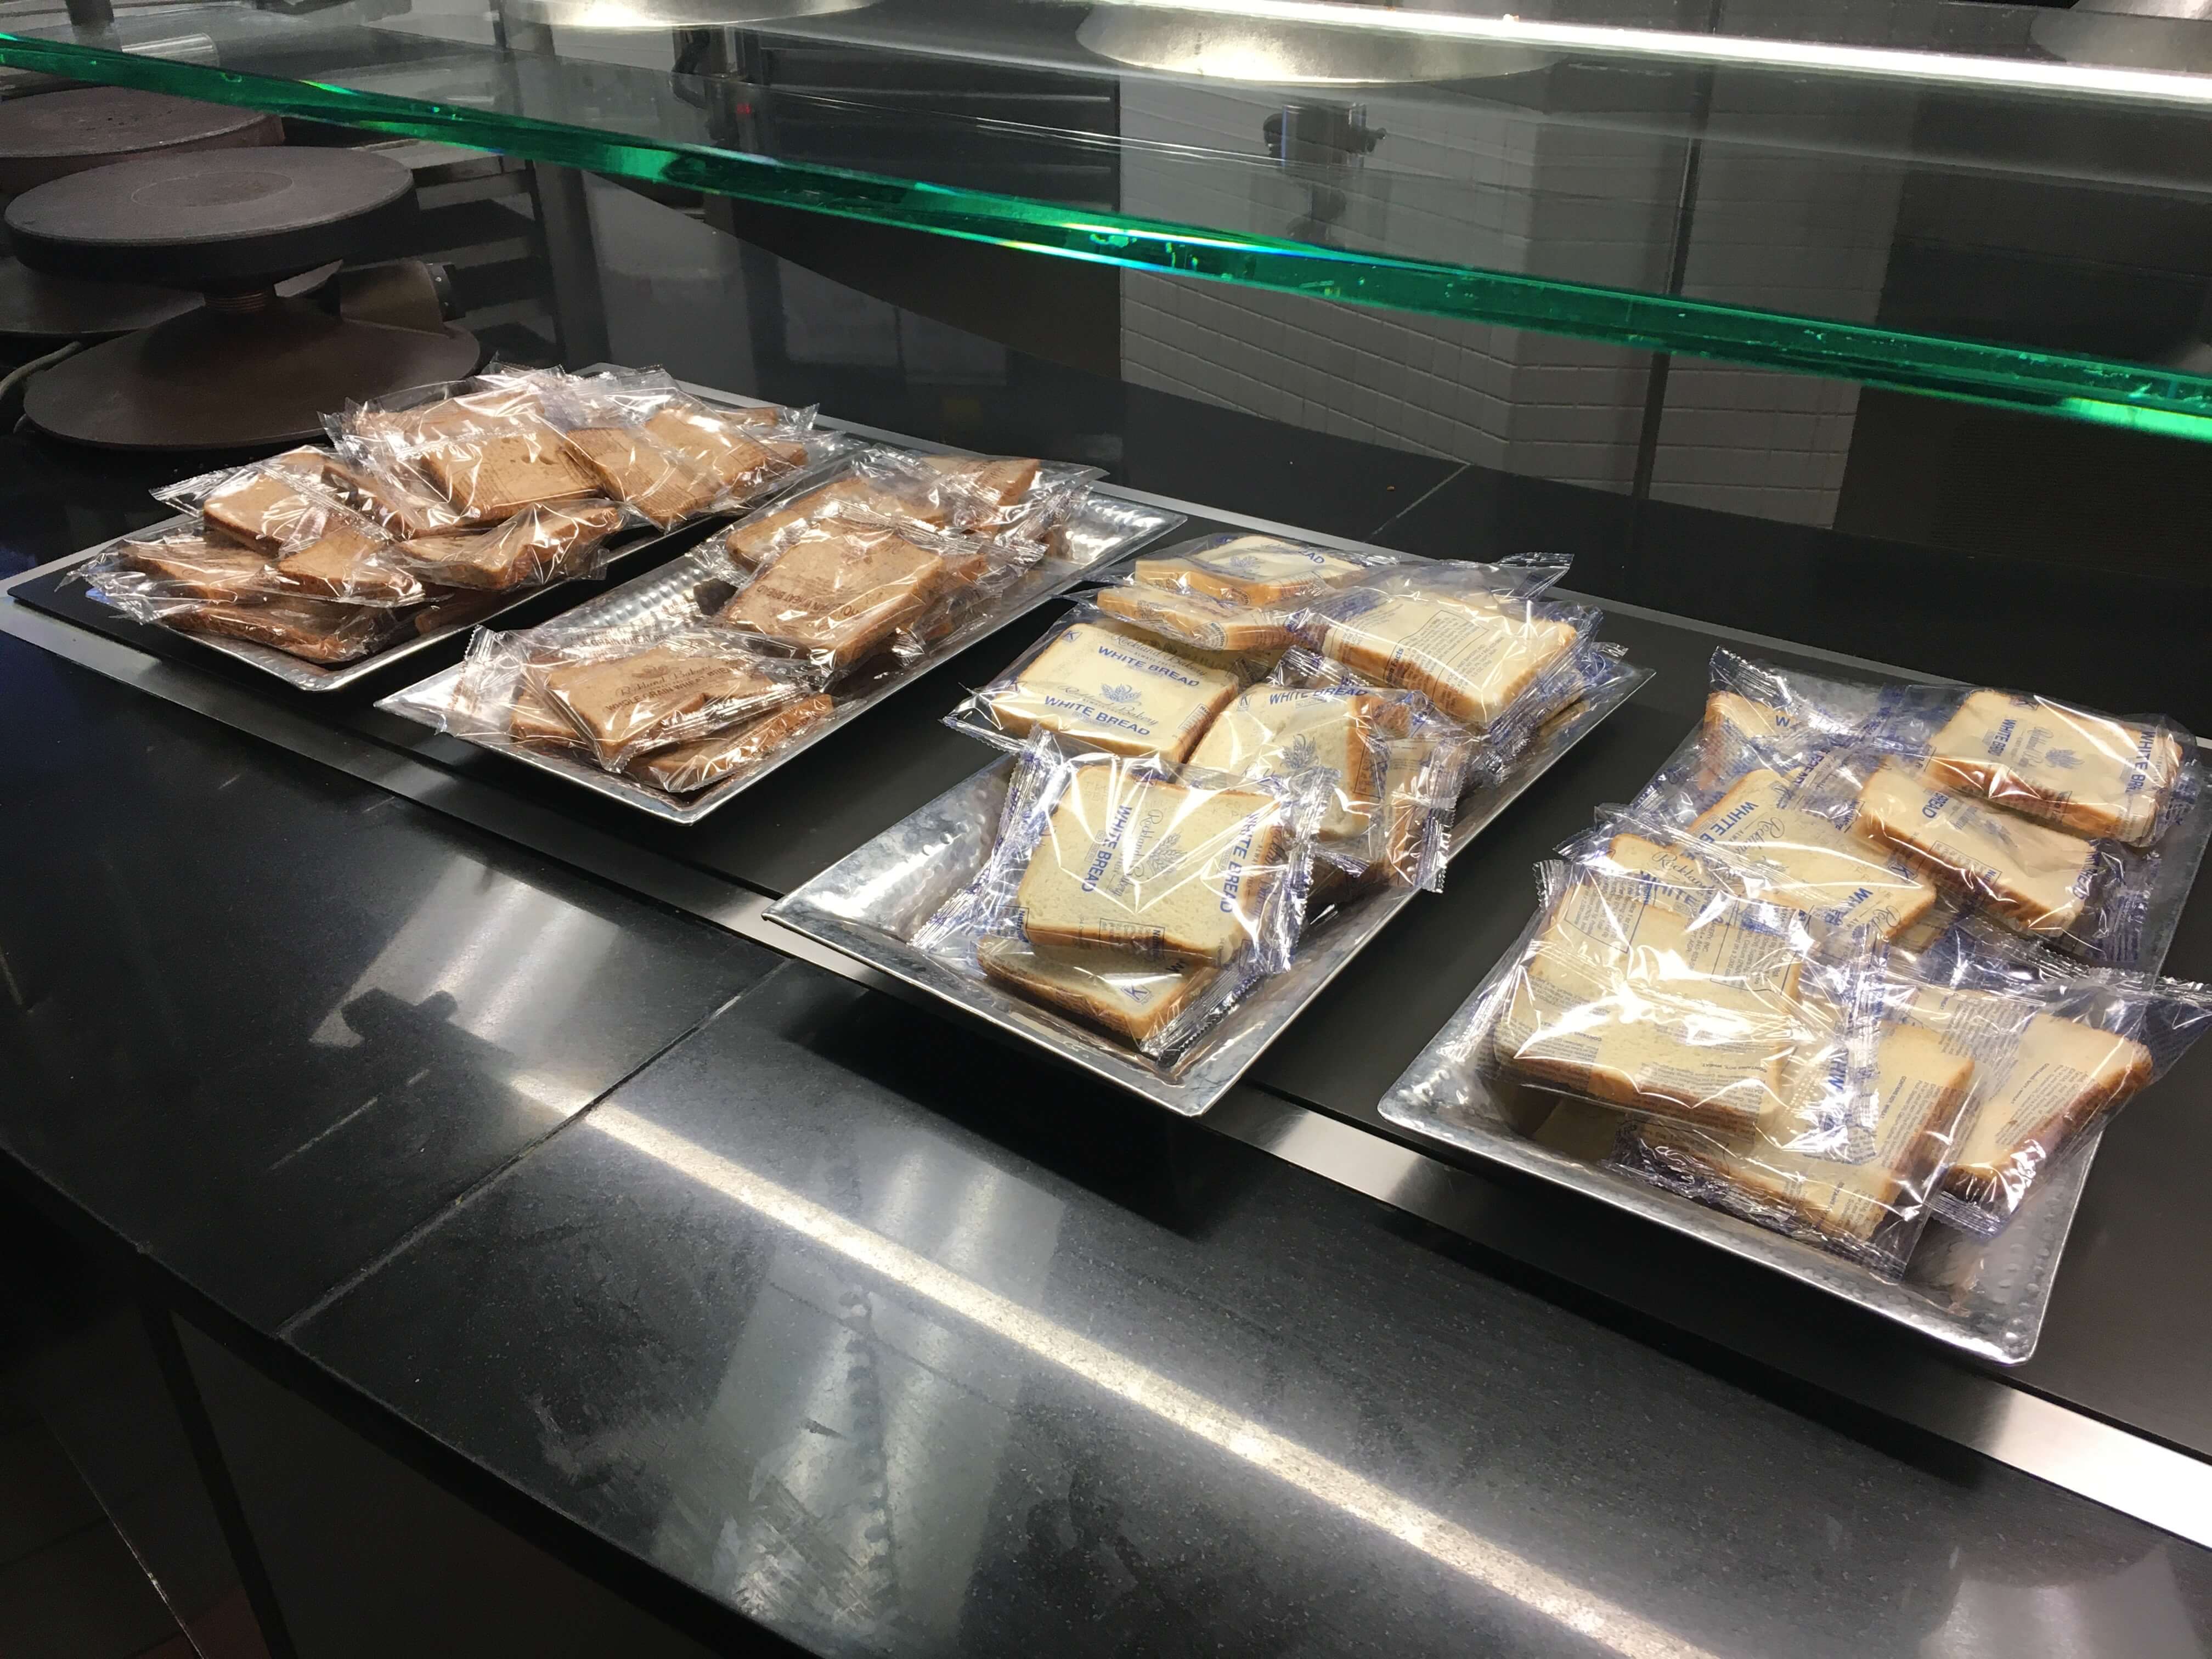 Individually packaged bread slices in the Princeton University college campus dining hall. (April 2020)